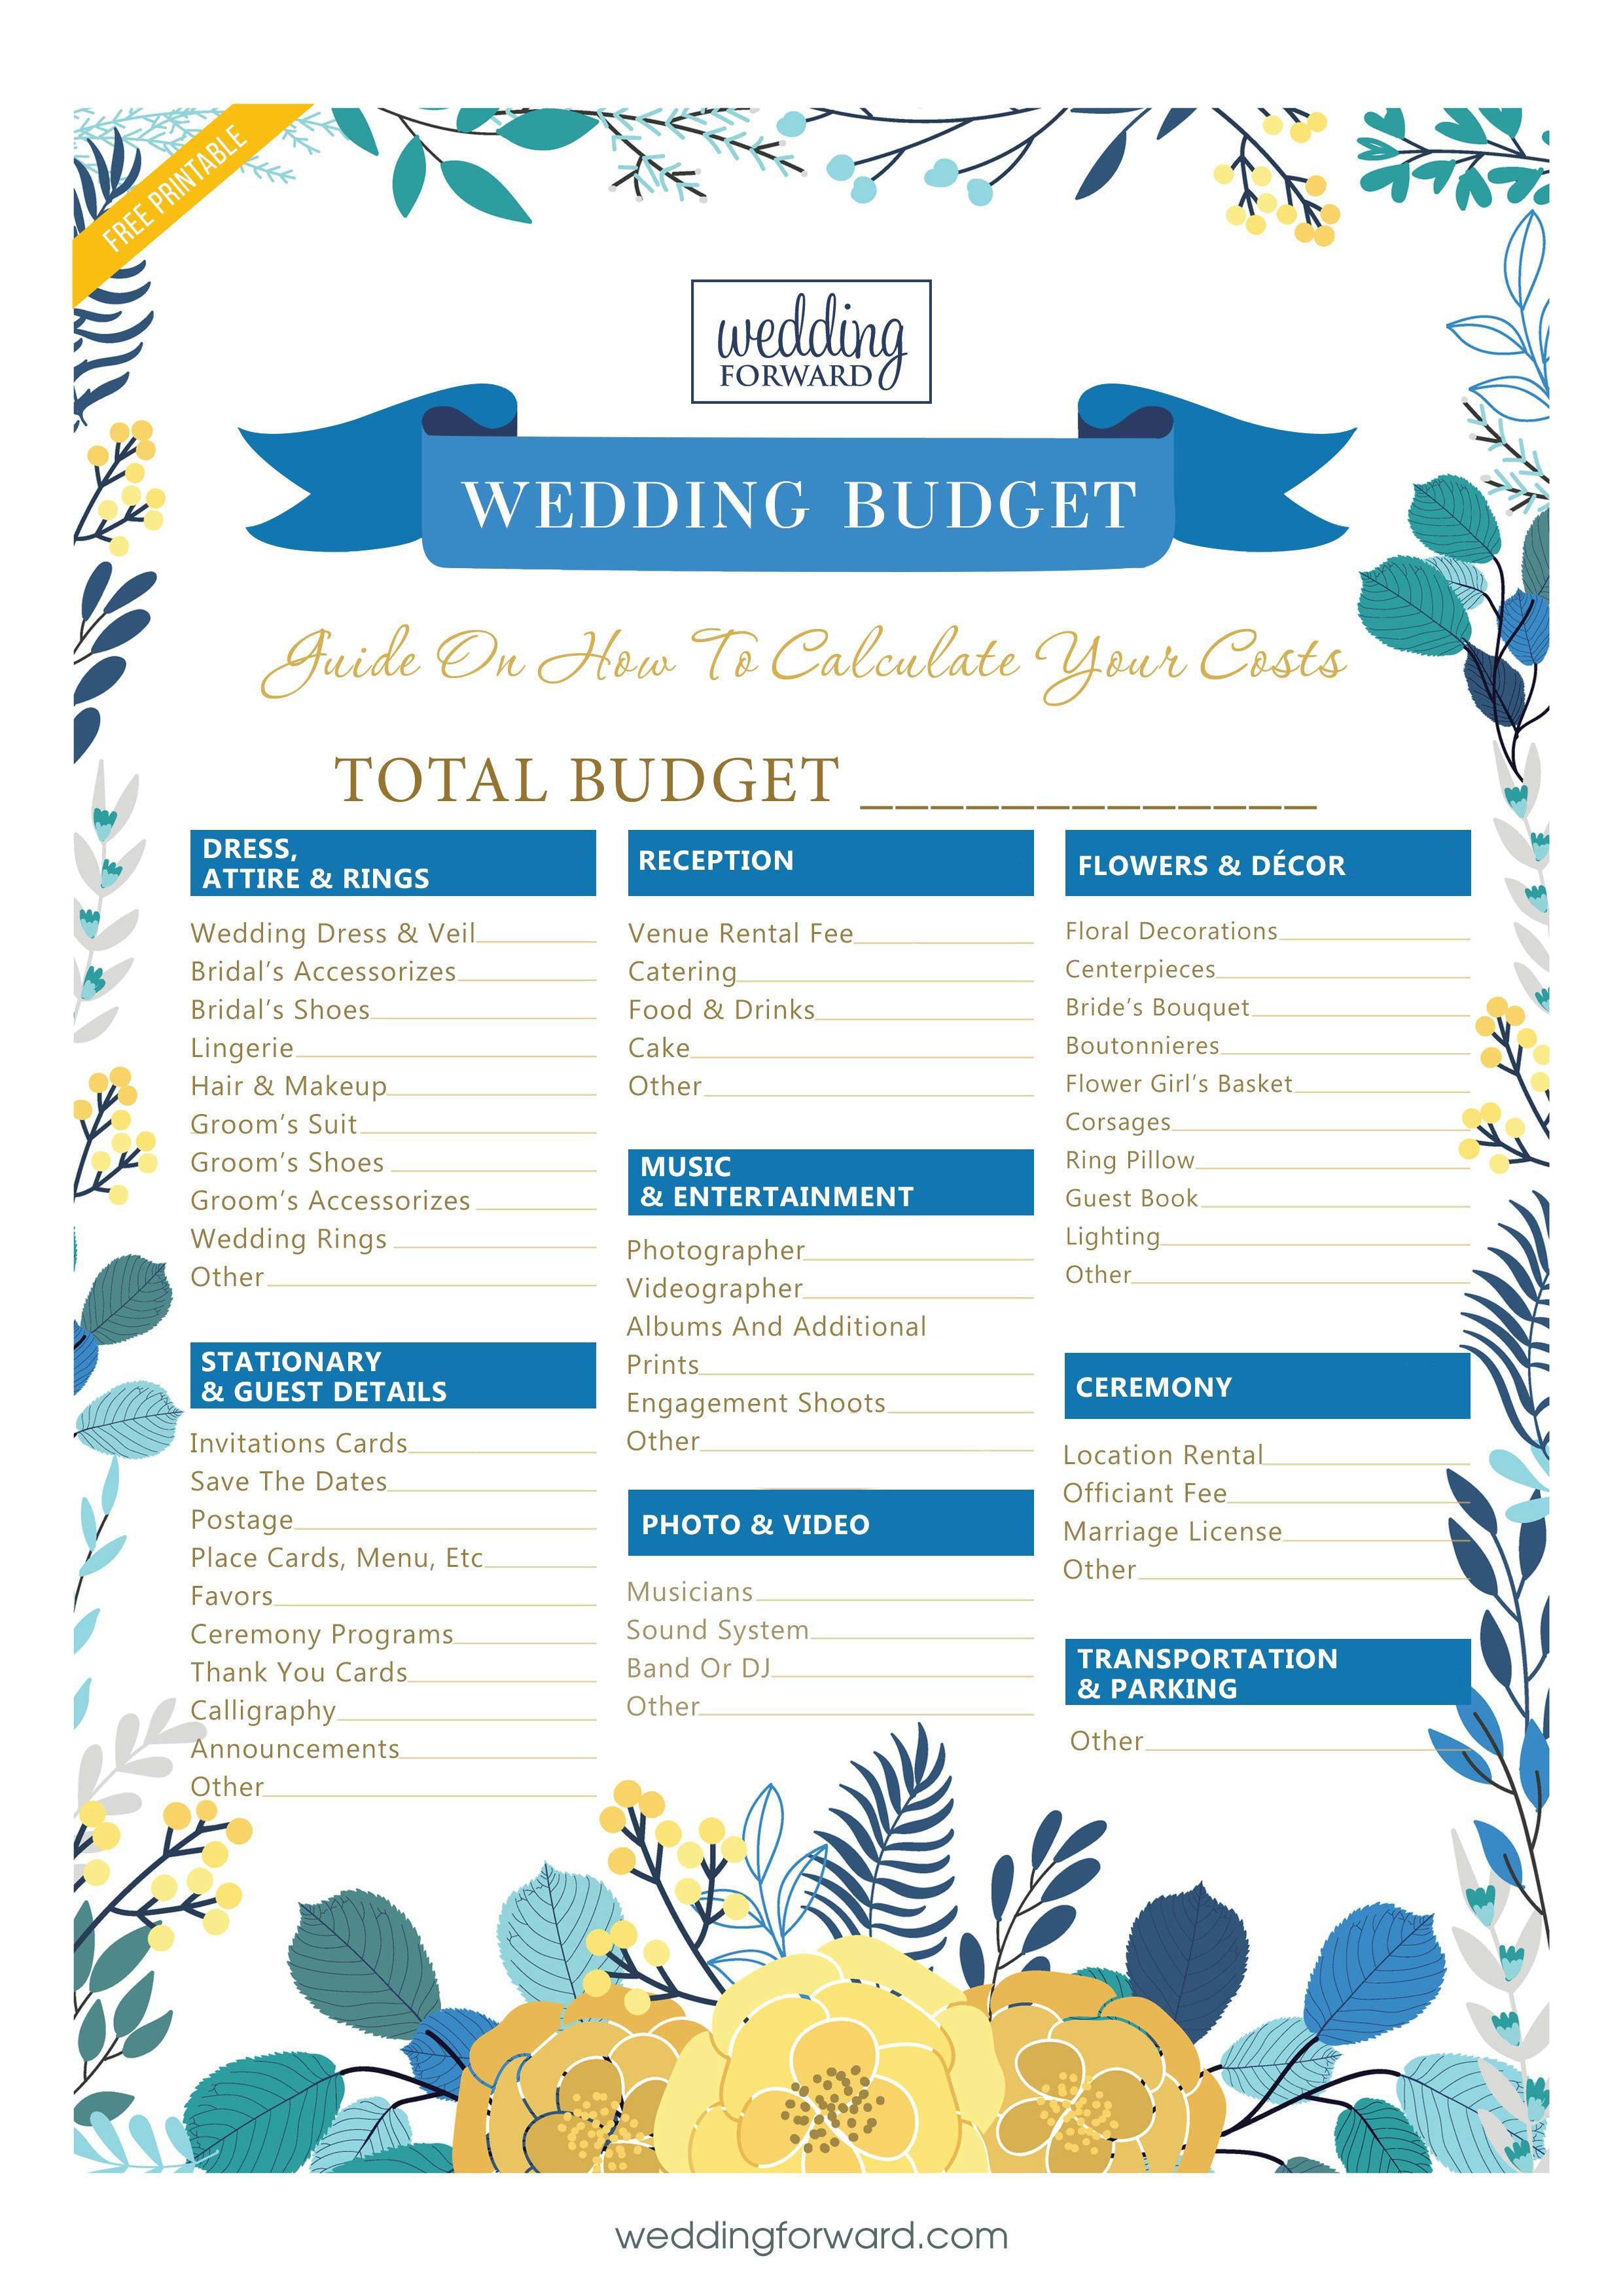 Wedding Budget Breakdown: Ultimate Guide + Free Checklists